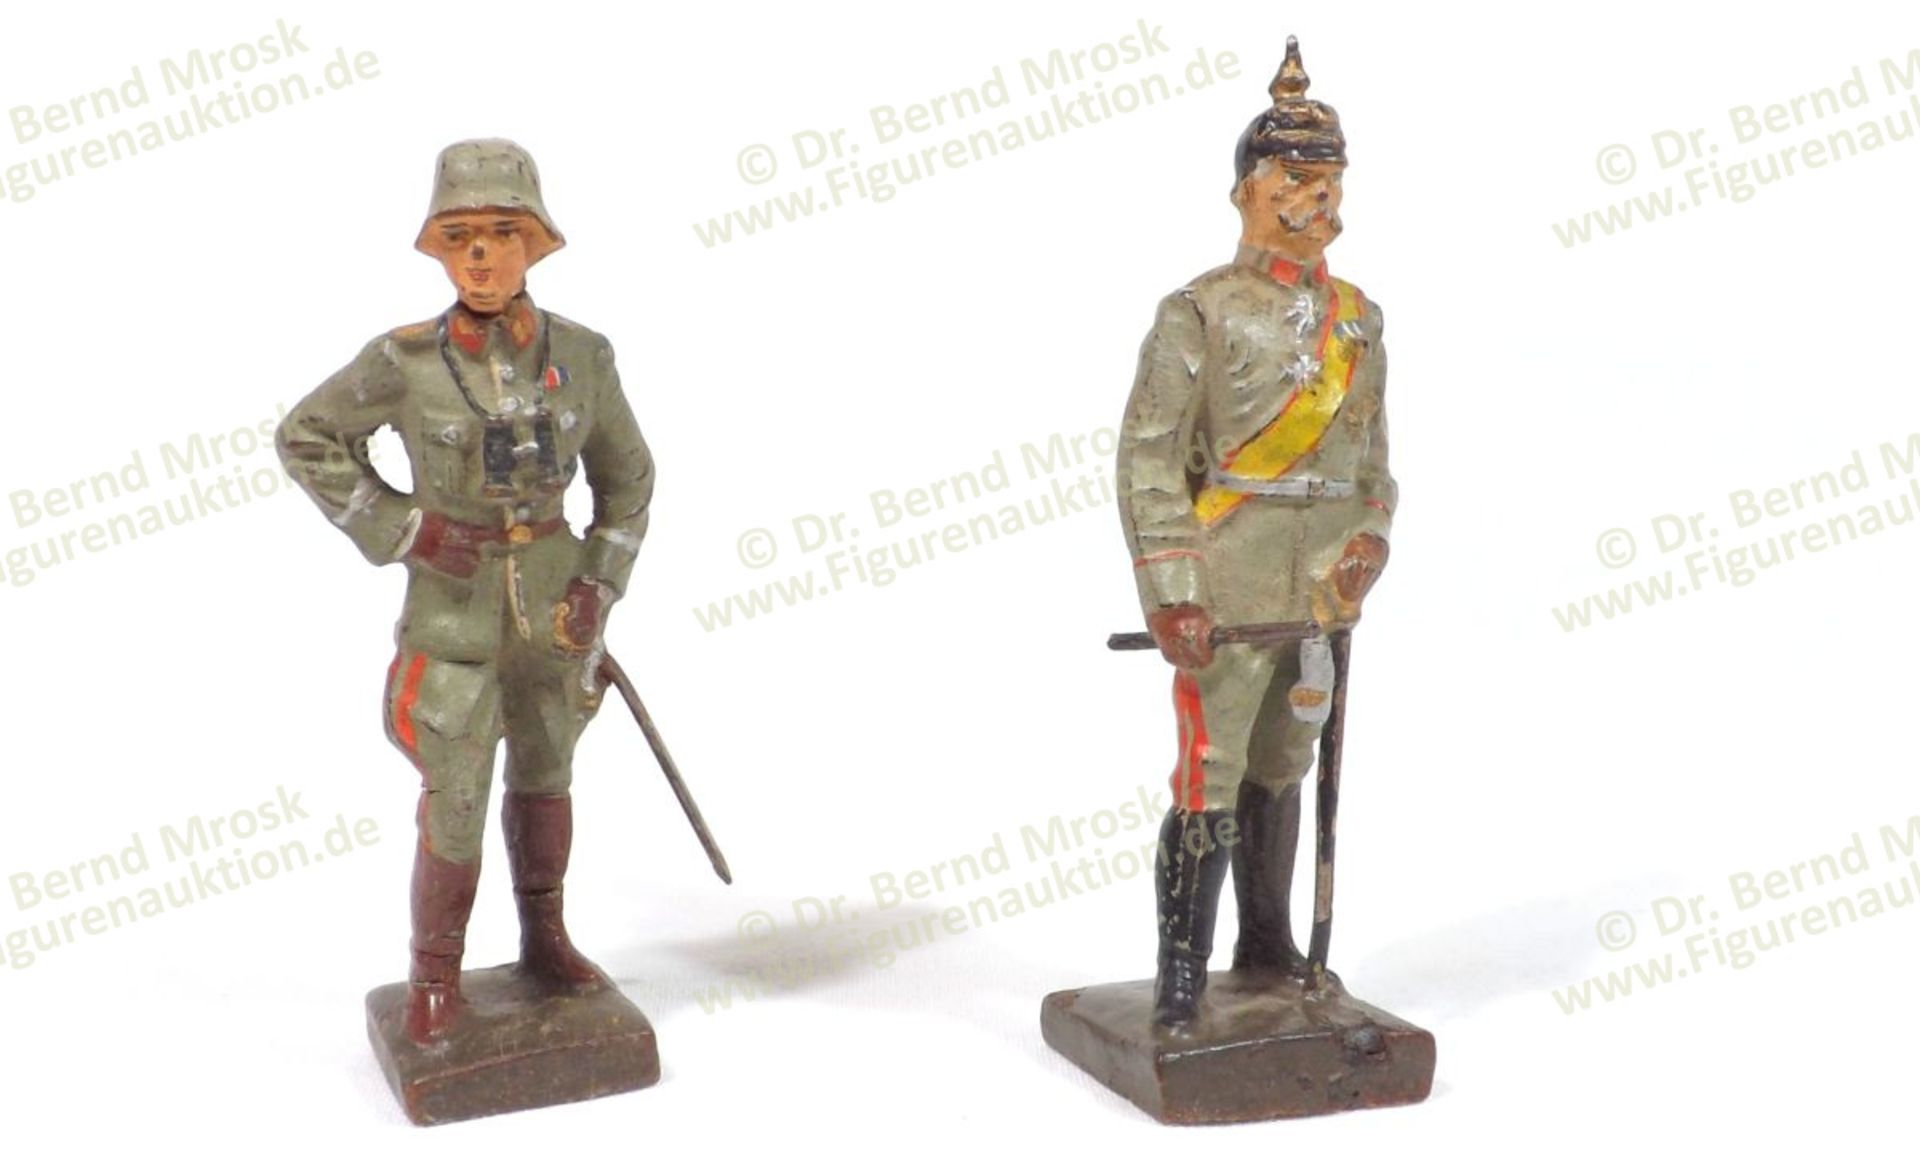 German military, Lineol, composition figures, 7-7,5 cm size, made in Germany about 1938